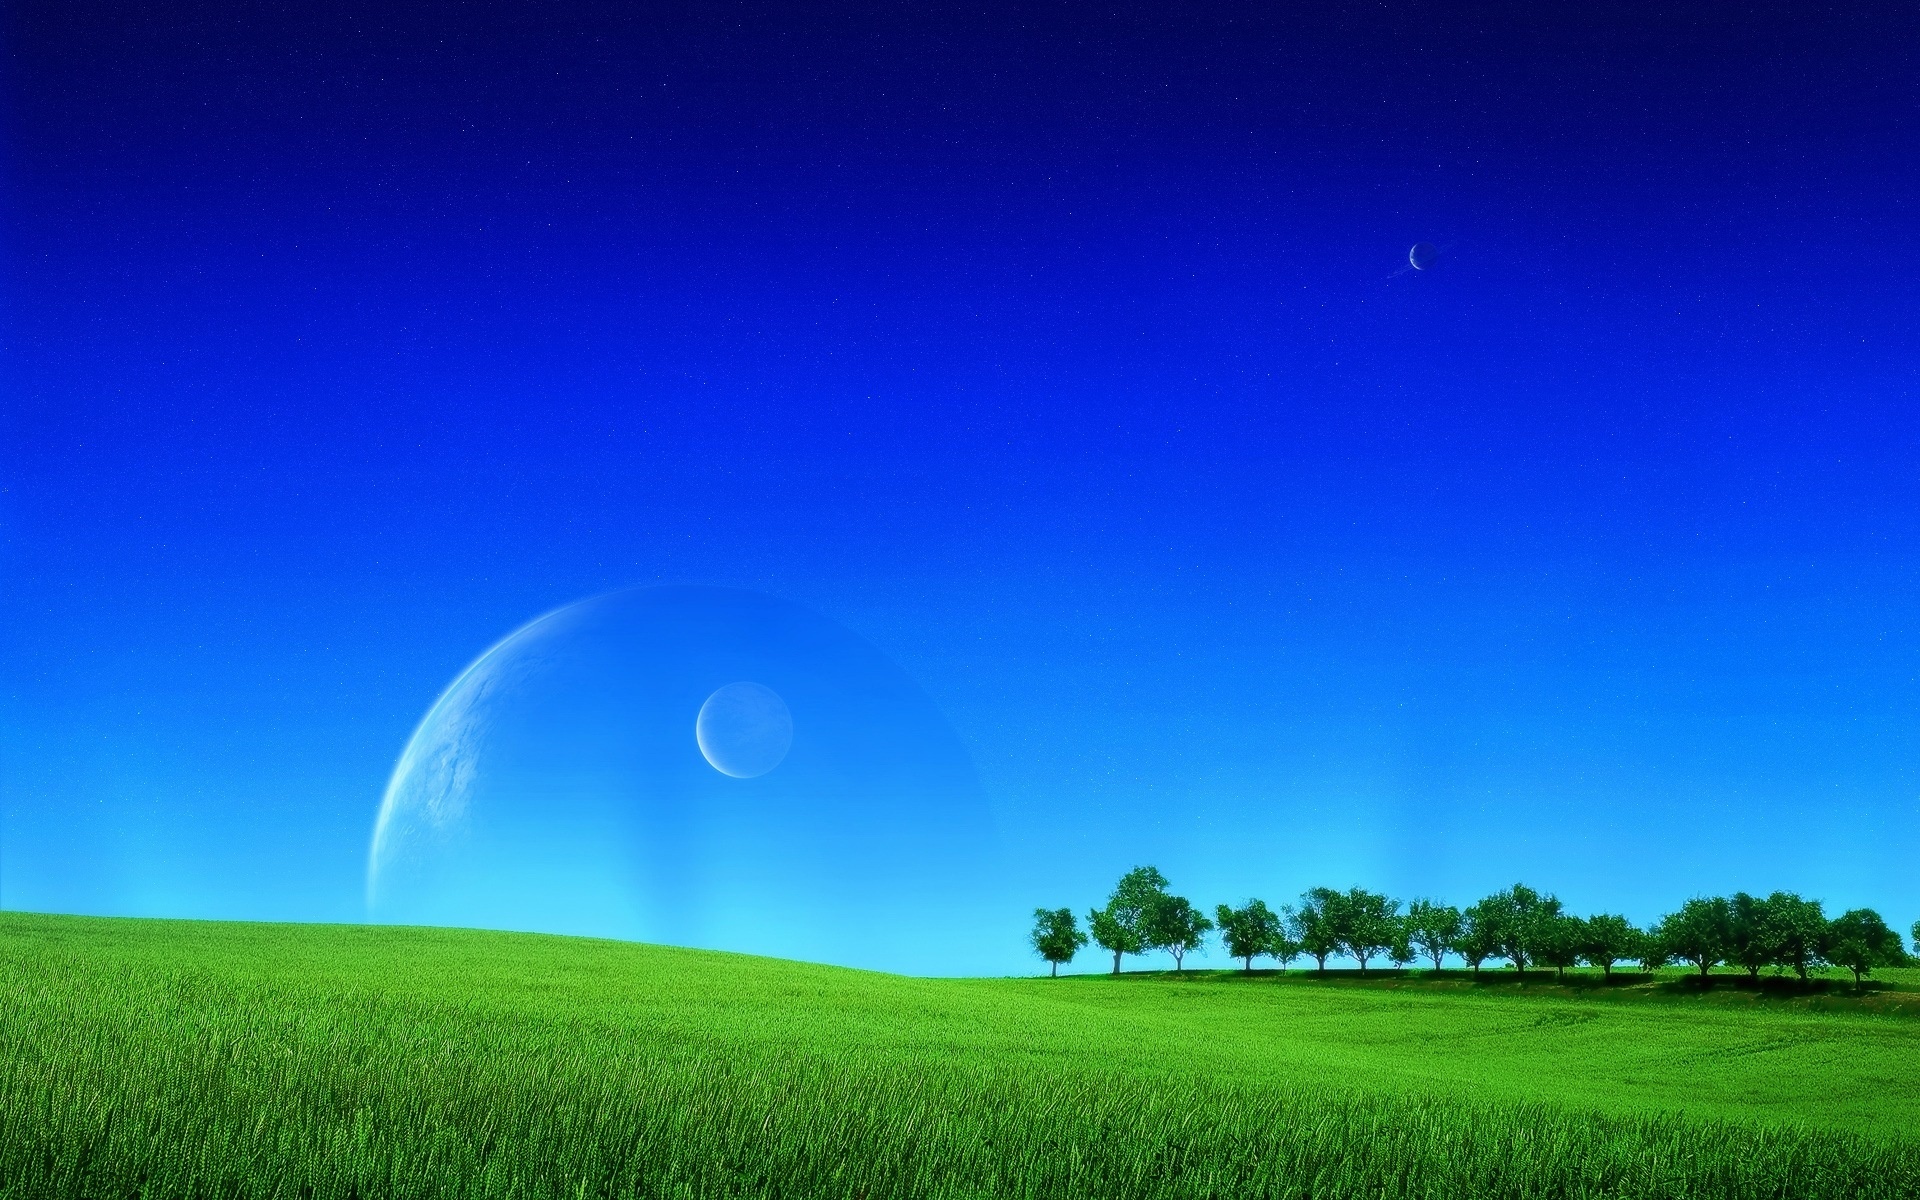 Grass and Sky: Fantasy landscape, Field, Moonlight, Surreal horizon, Meadow, Plain, Lawn. 1920x1200 HD Background.